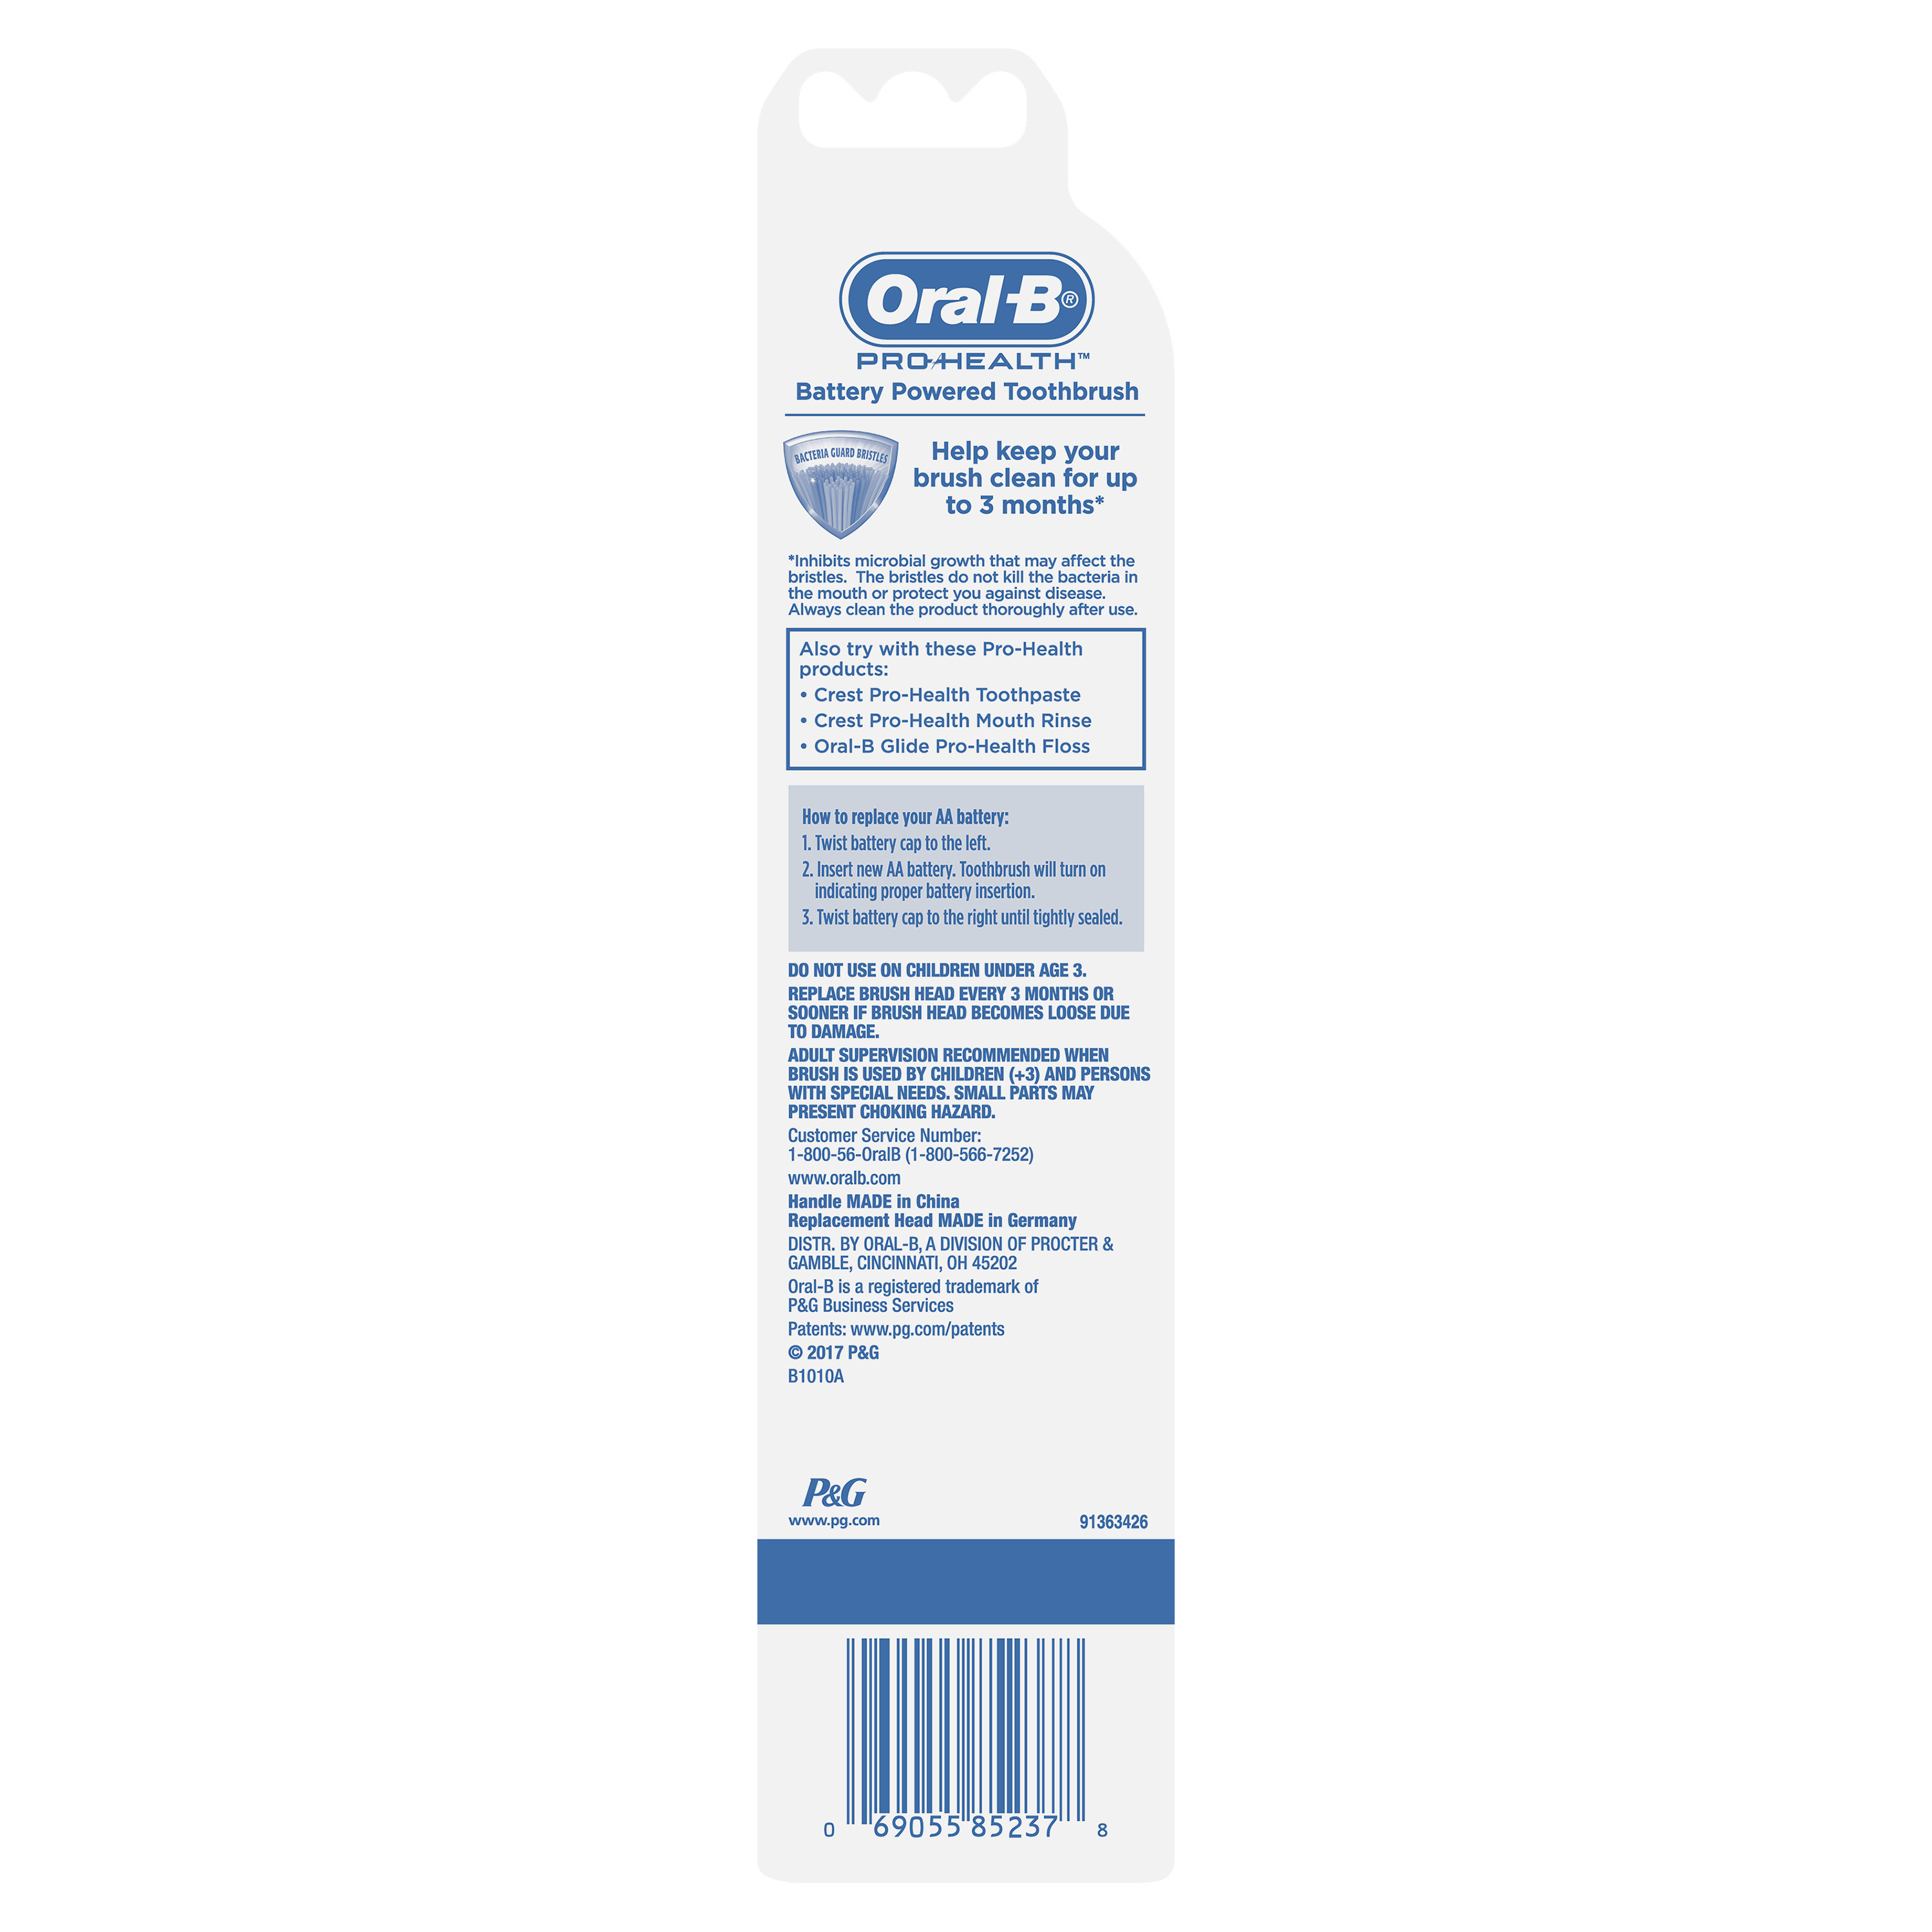 Oral-B Pro-Health Battery Power Toothbrush 1 Count, Colors May Vary - image 2 of 8